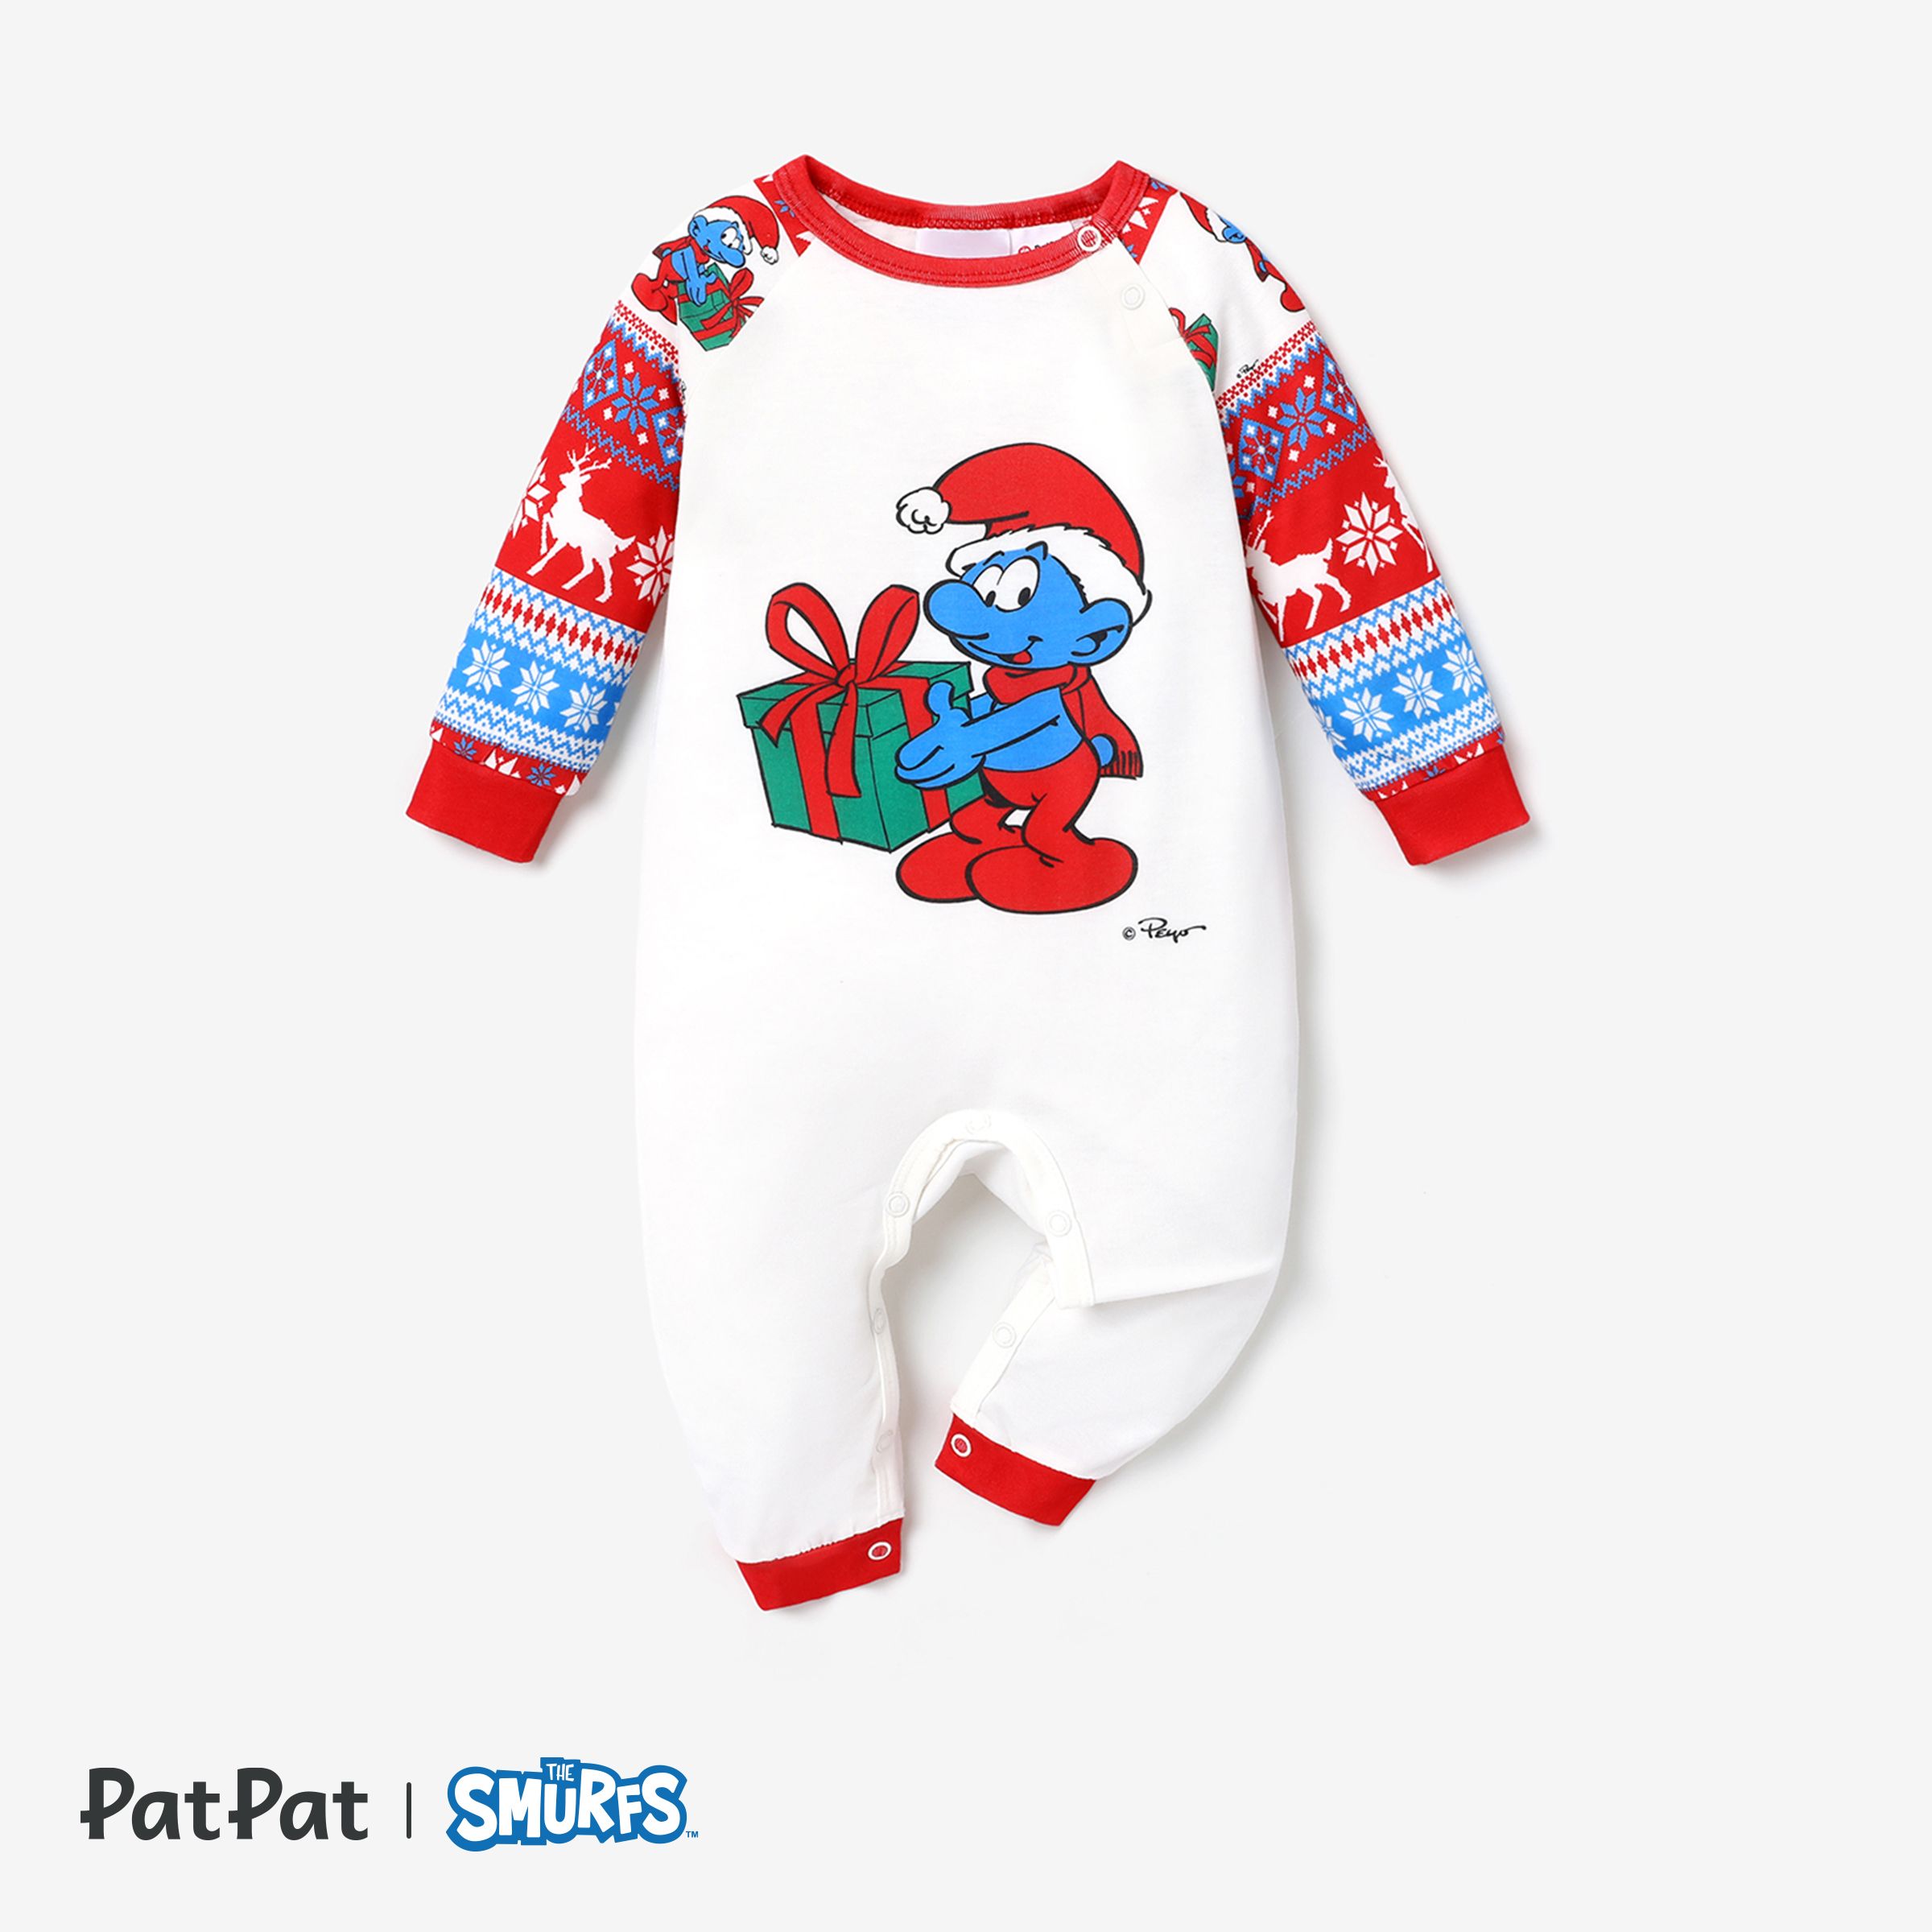 The Smurfs Family Matching Graphic Long-sleeve Pajamas(Flame Resistant)